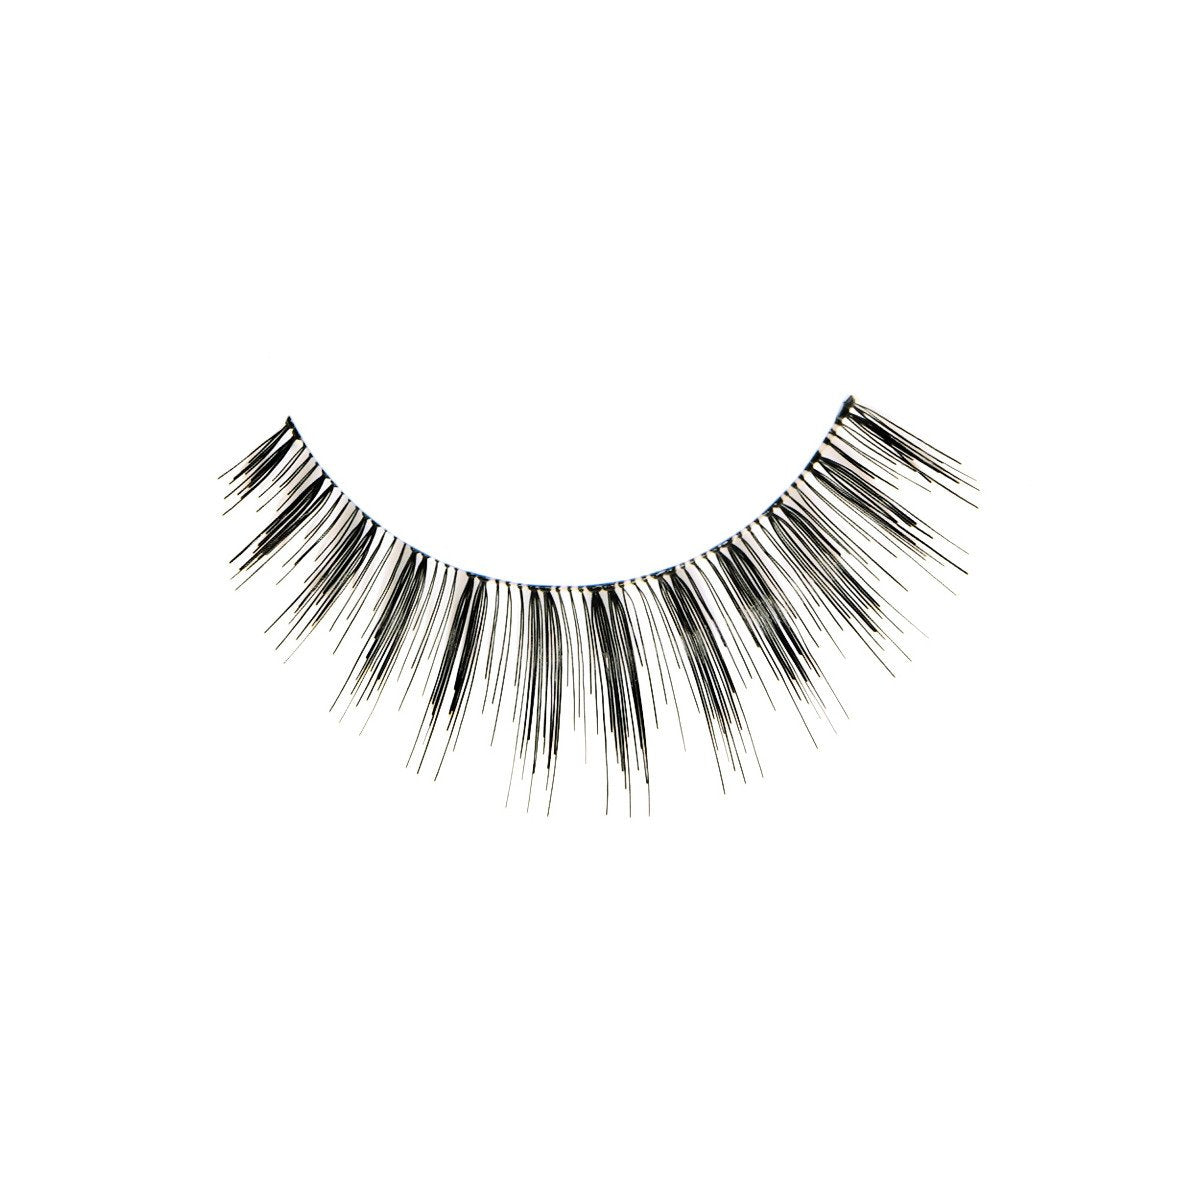 Red Cherry lashes - Madison 73